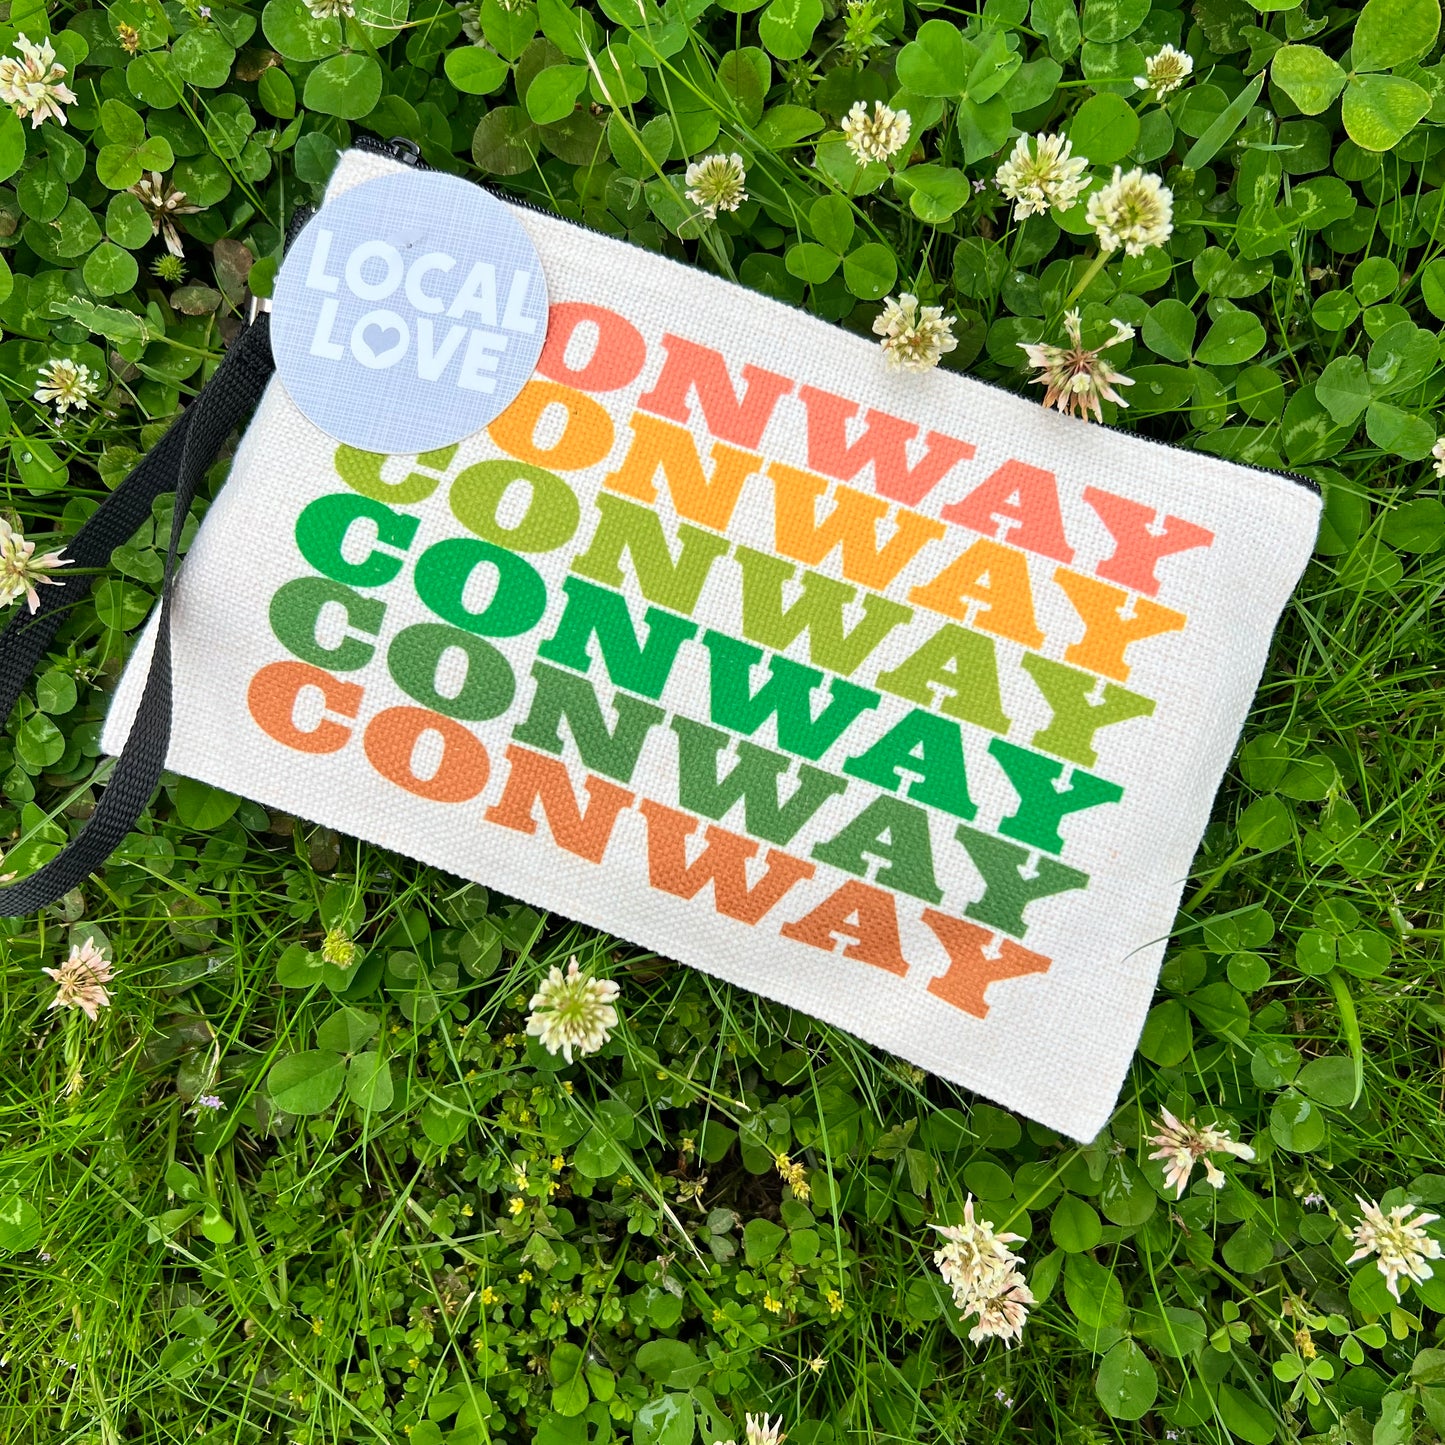 off-white zipper bag with "conway" printed in assorted colors laying in a field of clovers.